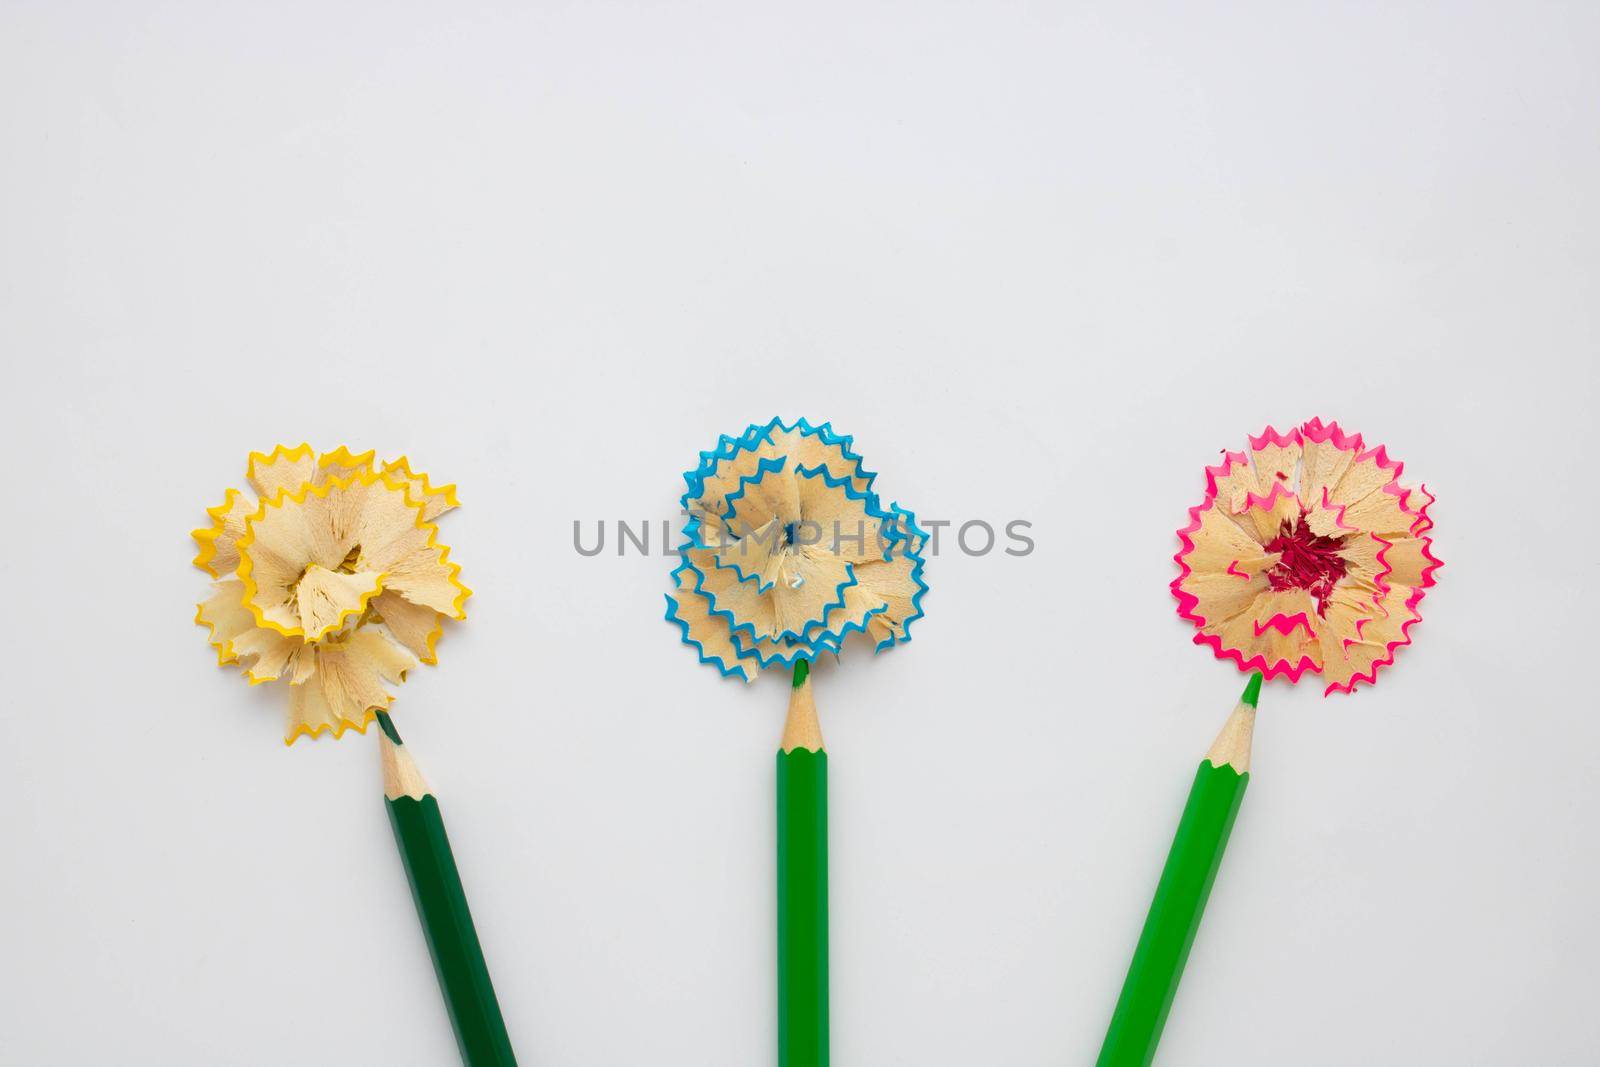 Colored wooden pencils, shavings lined with flowers, isolated on a white background. Old wooden pencils with garbage, shavings. by lapushka62